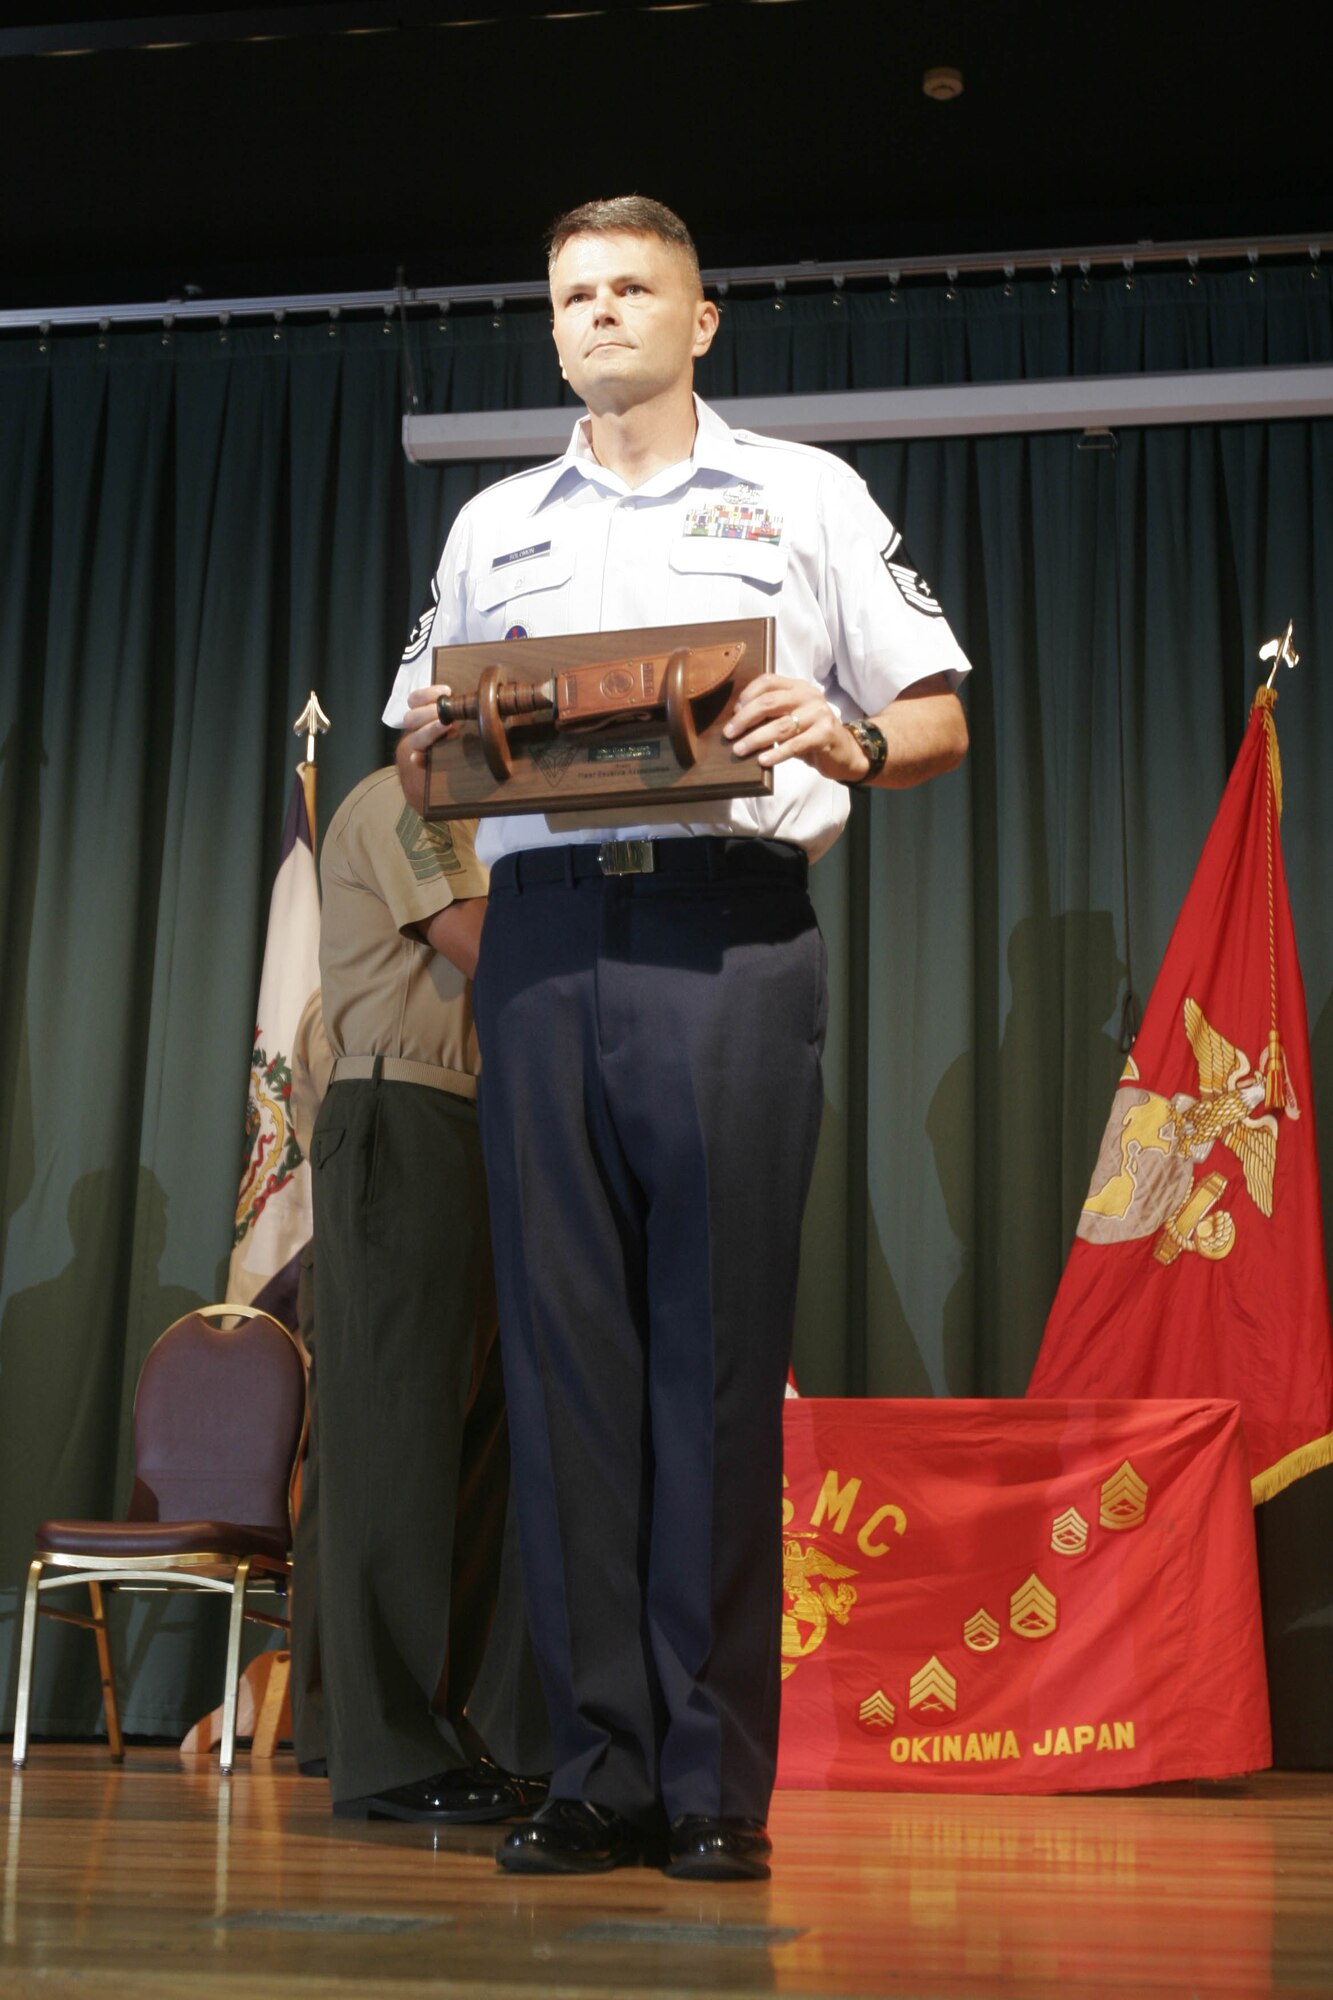 CAMP HANSEN, OKINAWA, Japan — Air Force Master Sgt. Gary Solomon receives the ‘Gung Ho’ Award during the Staff Noncommissioned Officer Academy Advanced Course 6-06 graduation Sept. 26 at The Palms on Camp Hansen. Solomon is the first non-Marine to win an award at the Okinawa SNCOA. Solomon is a munitions systems specialist with 372 Training Squadron, Air Education Training Command on Kadena Air Base. (Official U.S. Marine Corps photo by Lance Cpl. Bryan A. Peterson) 